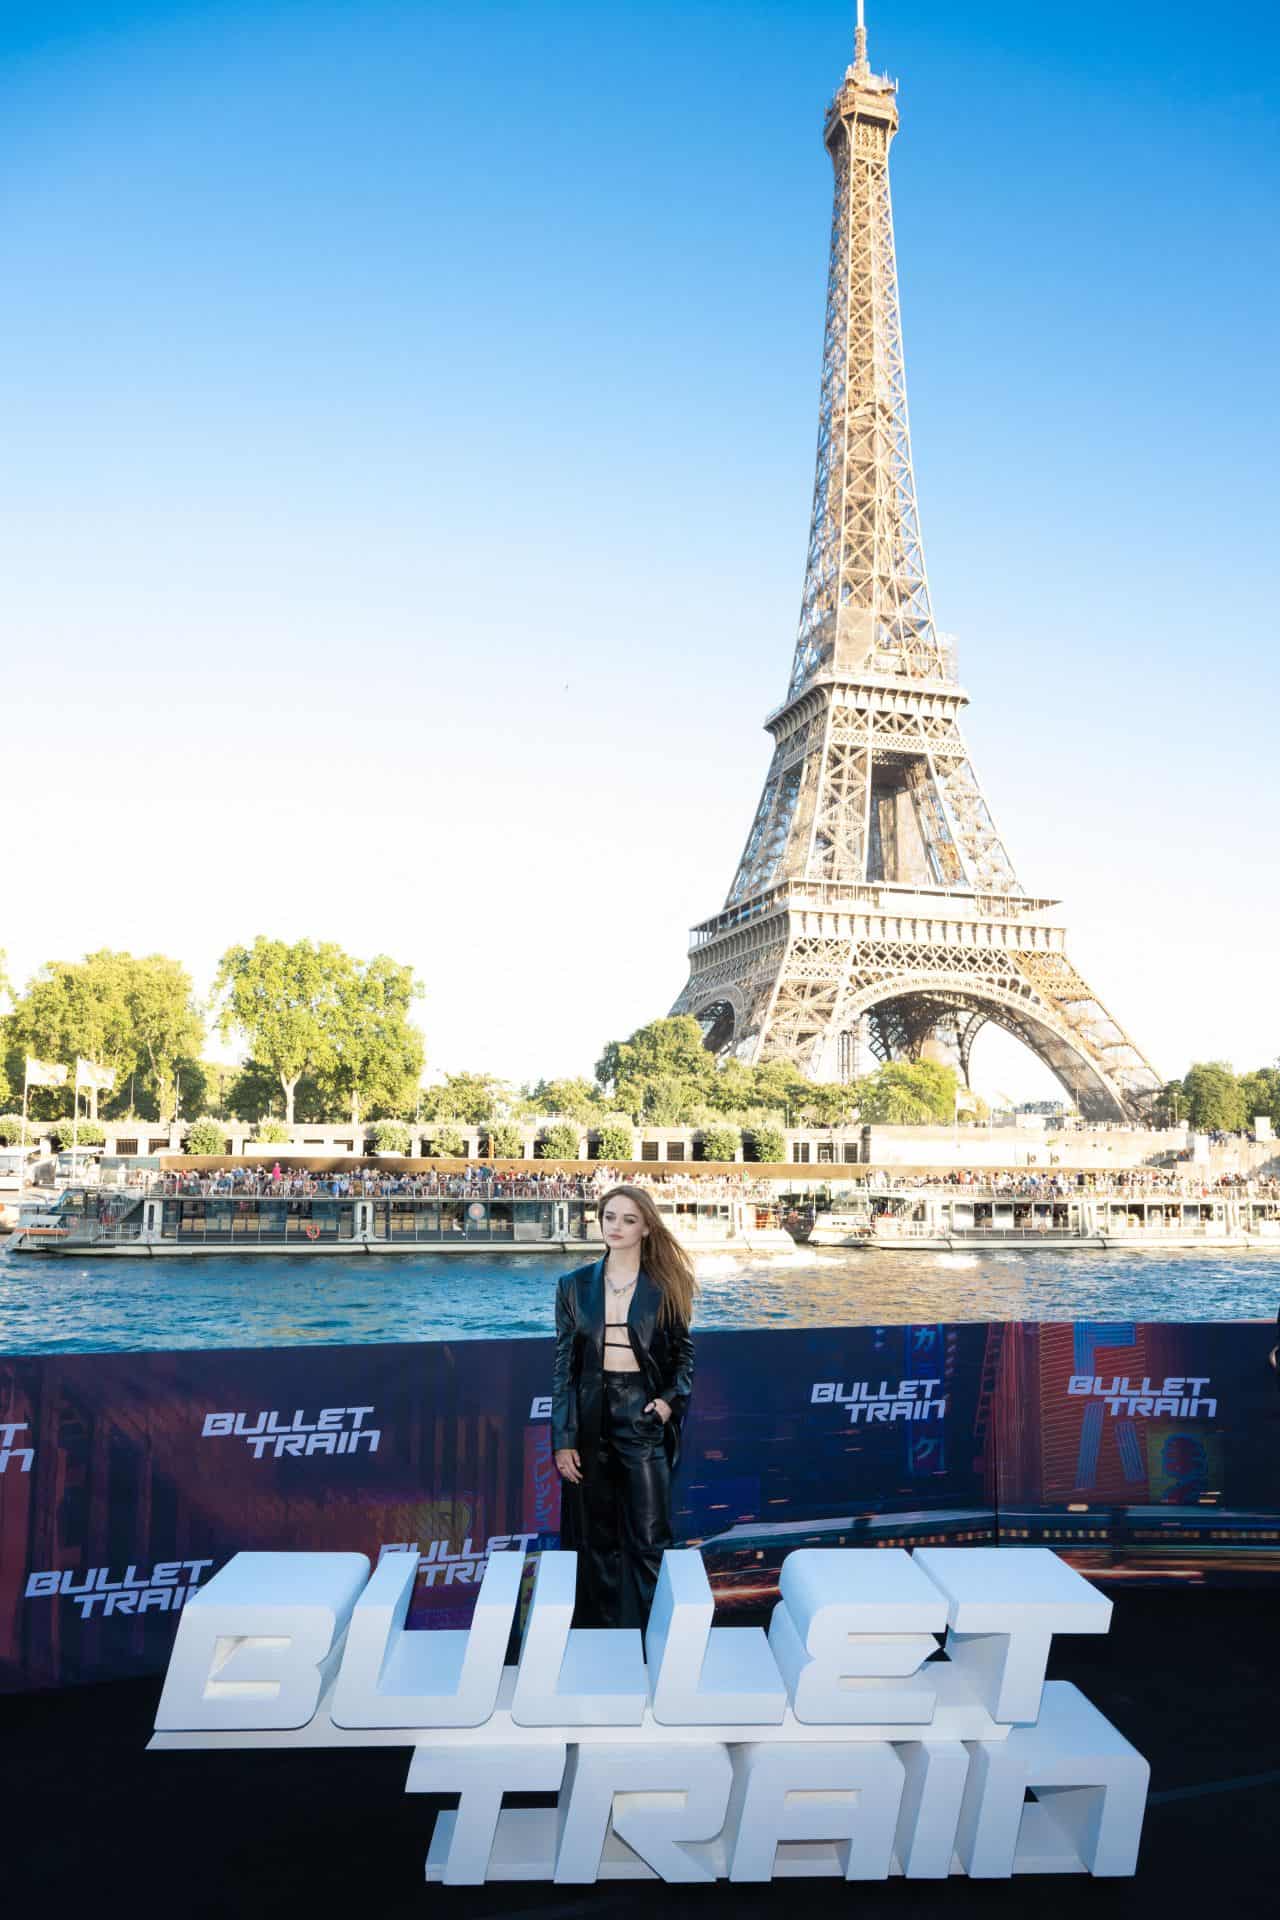 Joey King Wows in Cut-Out Bra Top at the "Bullet Train" Photocall in Paris